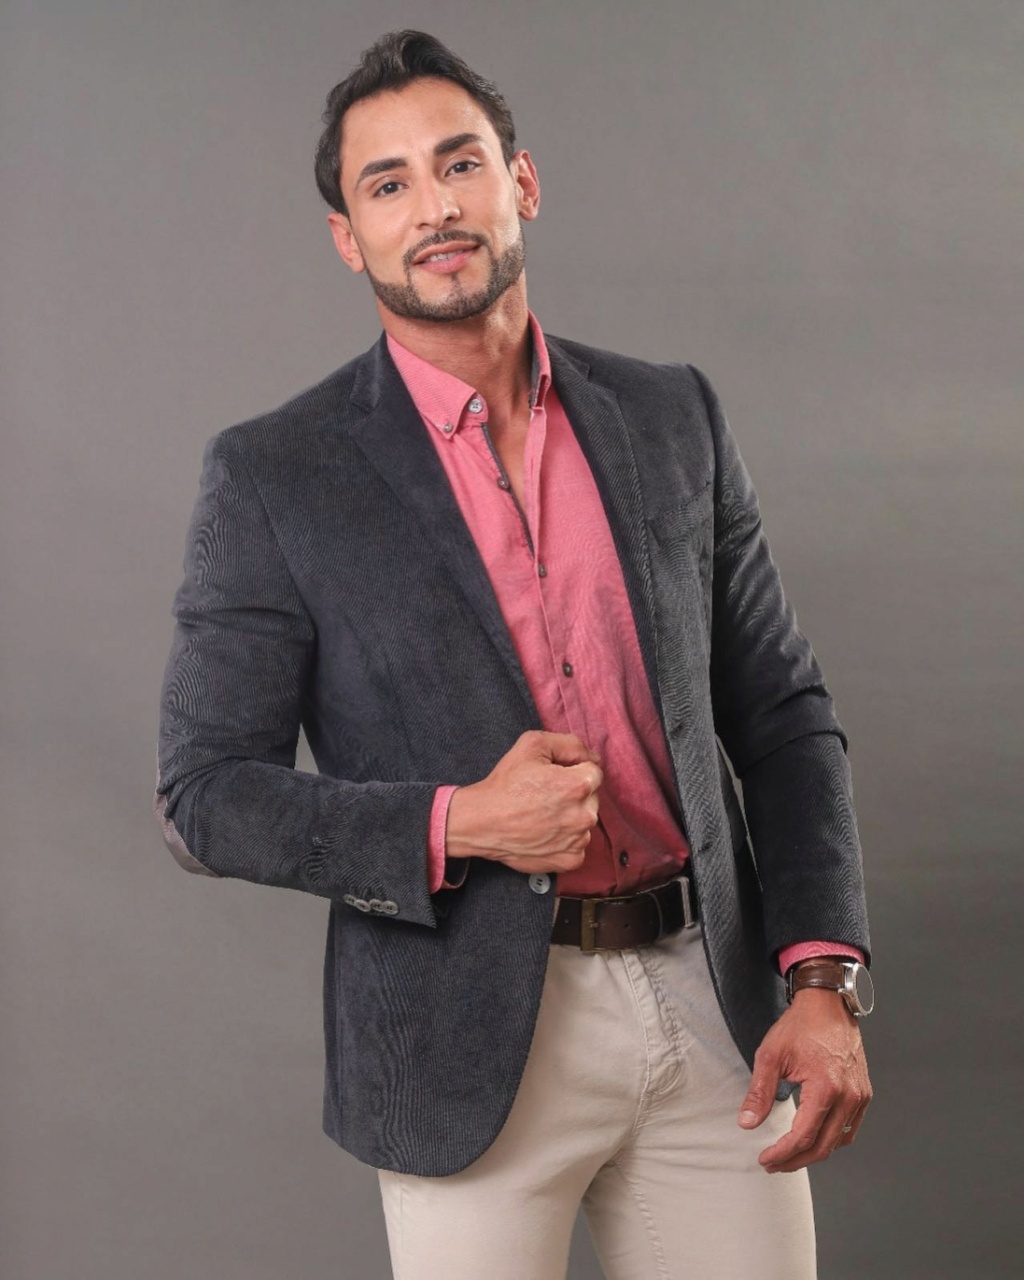 Mister Grand International 2021 is   PUERTO RICO  - Page 3 26304210